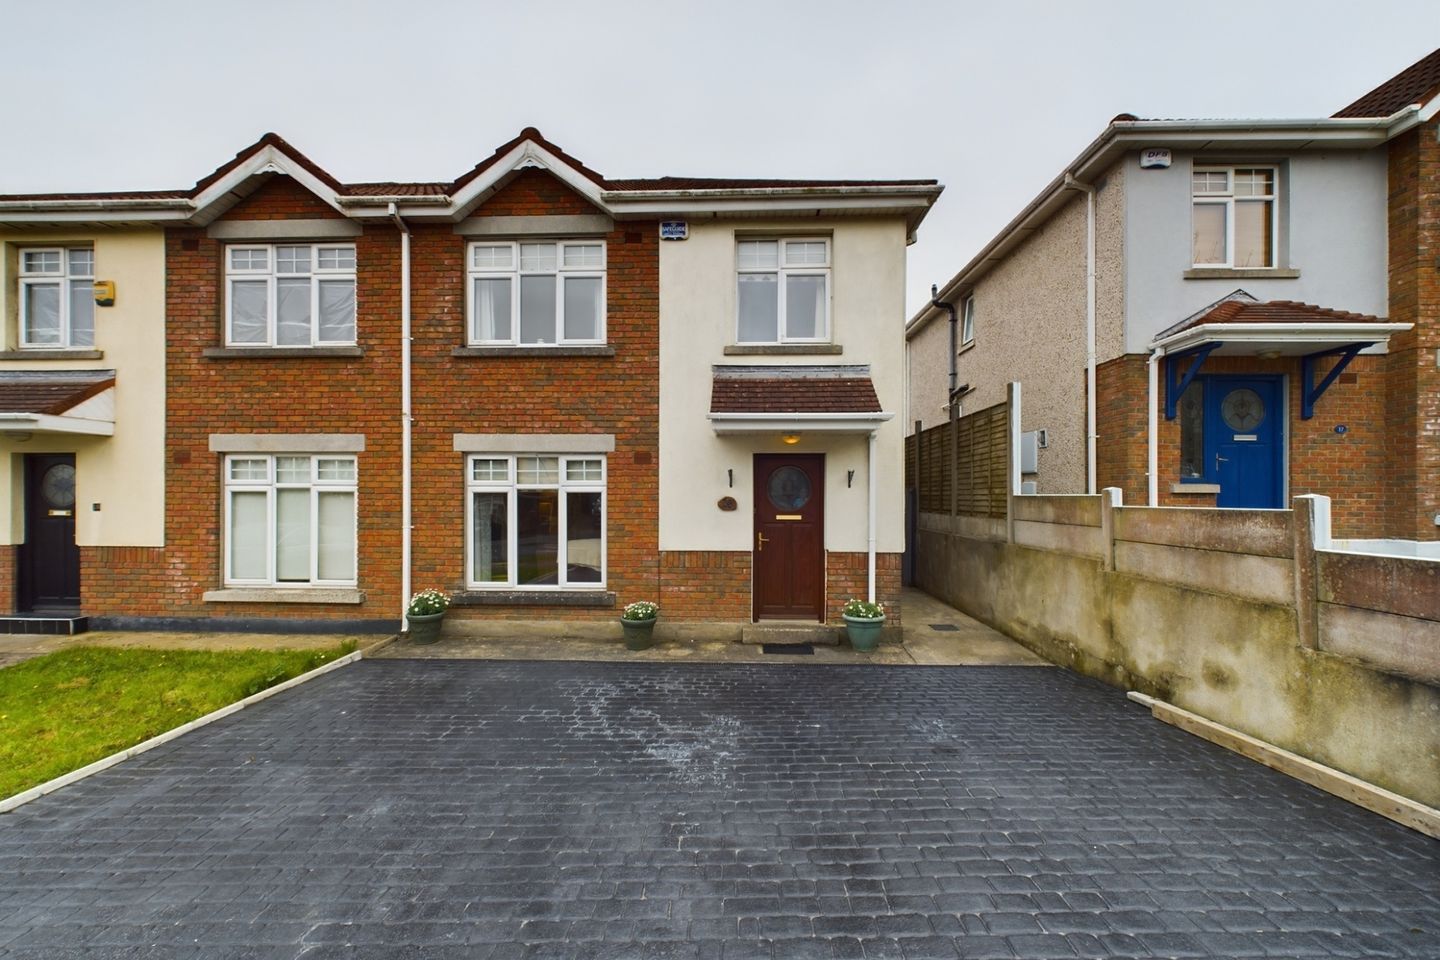 16 Carraig Heights, Gracedieu, Waterford, Waterford City, Co. Waterford, X91Y6V2